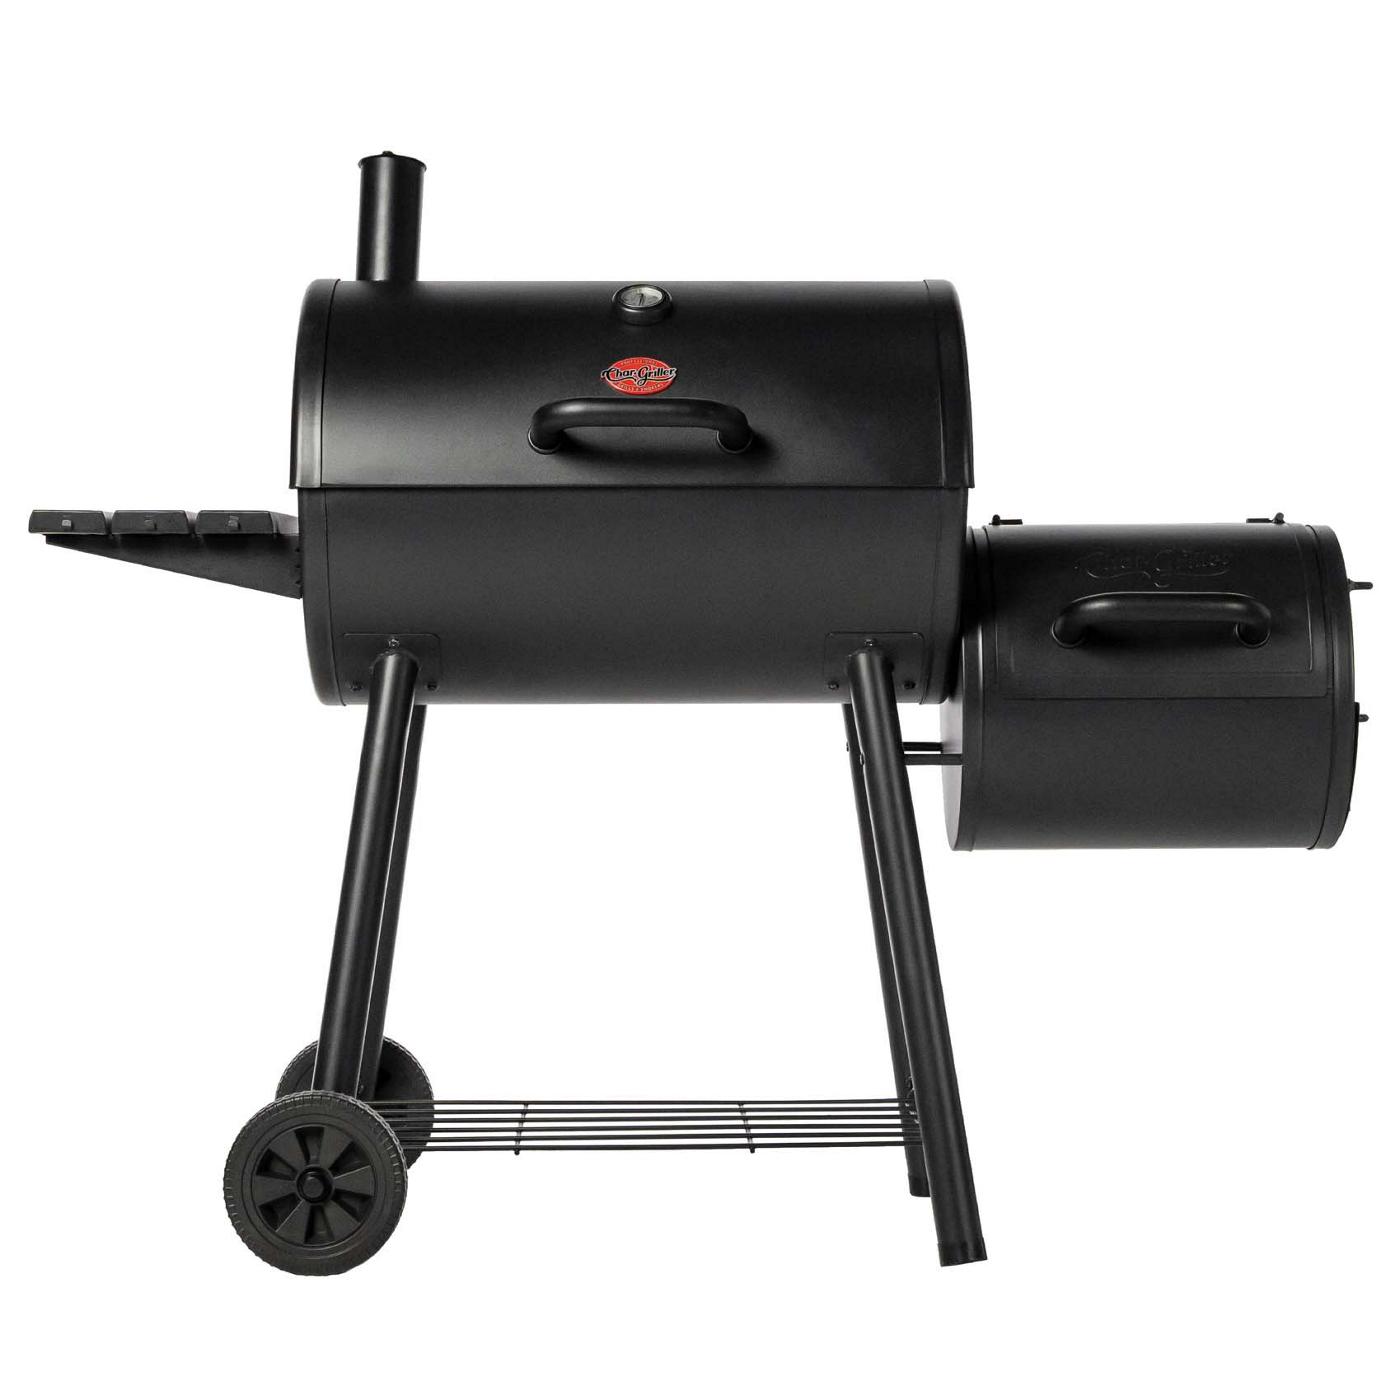 SUGIFT Portable BBQ Charcoal Grill with Offset Smoker